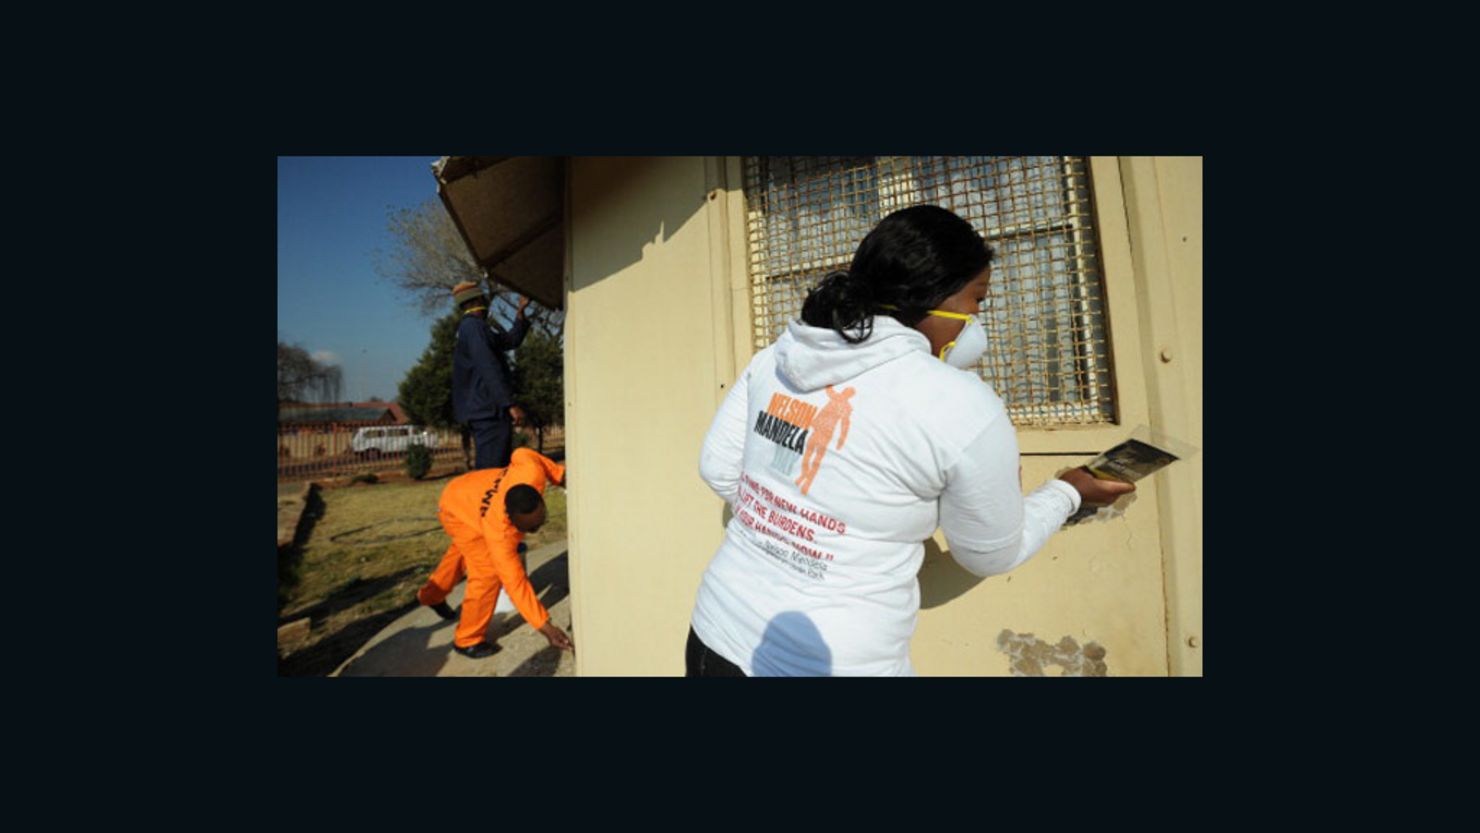 South Africans have been doing their part, like these government workers cleaning houses at a drug rehab center in Soweto.